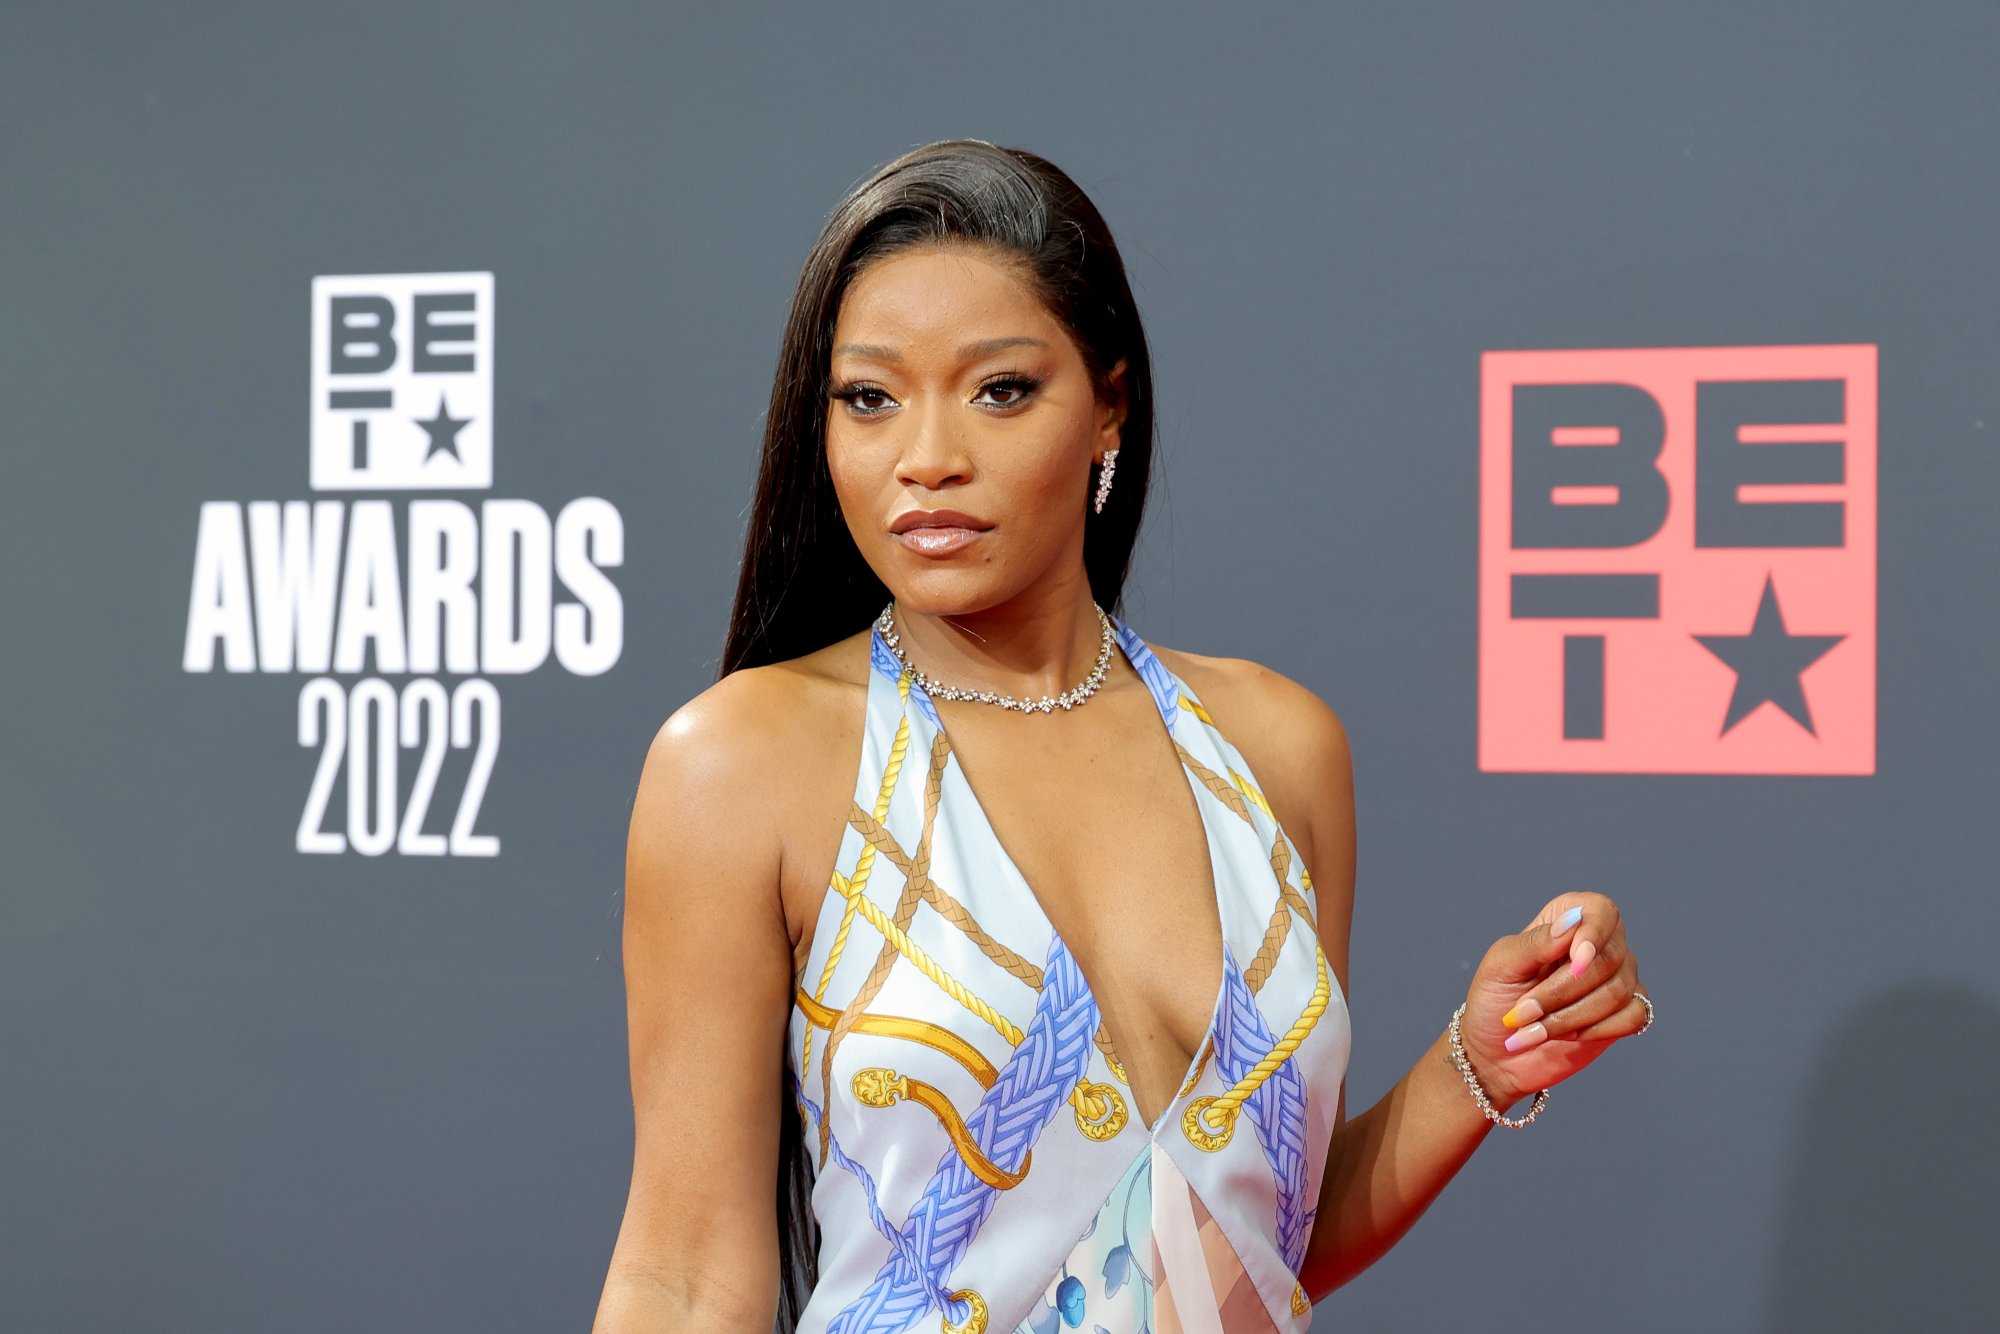 'Nope' actor Keke Palmer, who was compared to Zendaya wearing a white, blue, and gold dress with multicolored fingernails. She's standing in front of the BET Awards 2022 step and repeat.